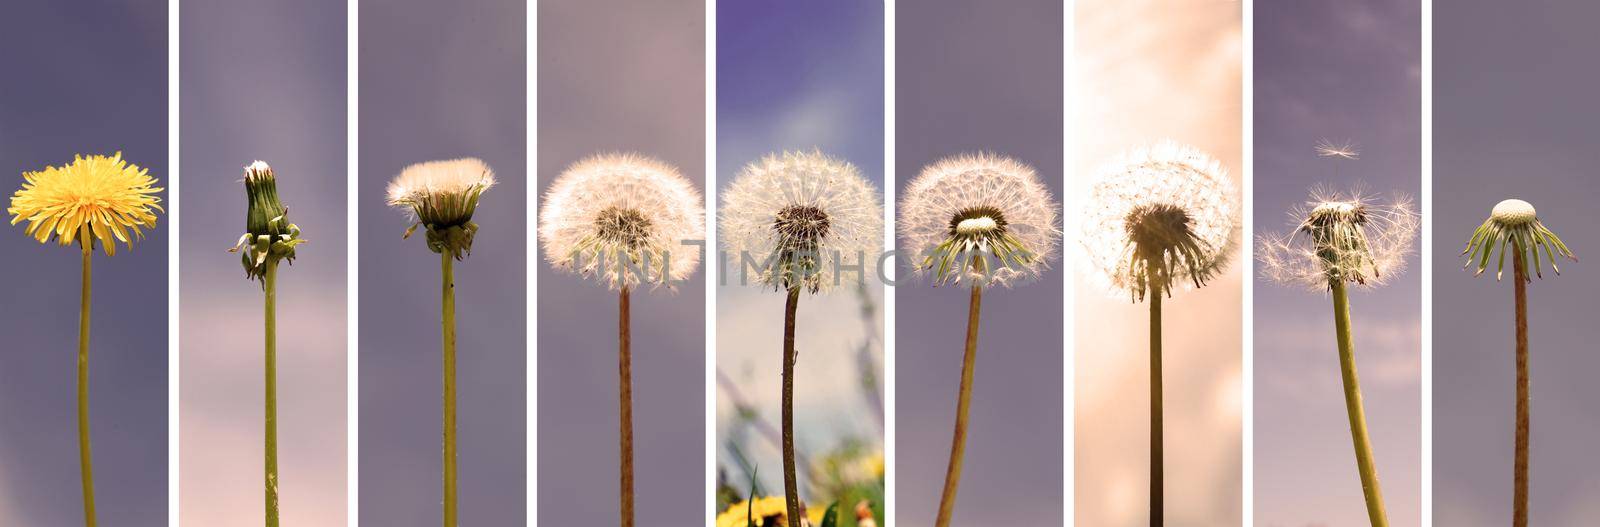 Dandelion flower with flying feathers on blue sky. by Taut